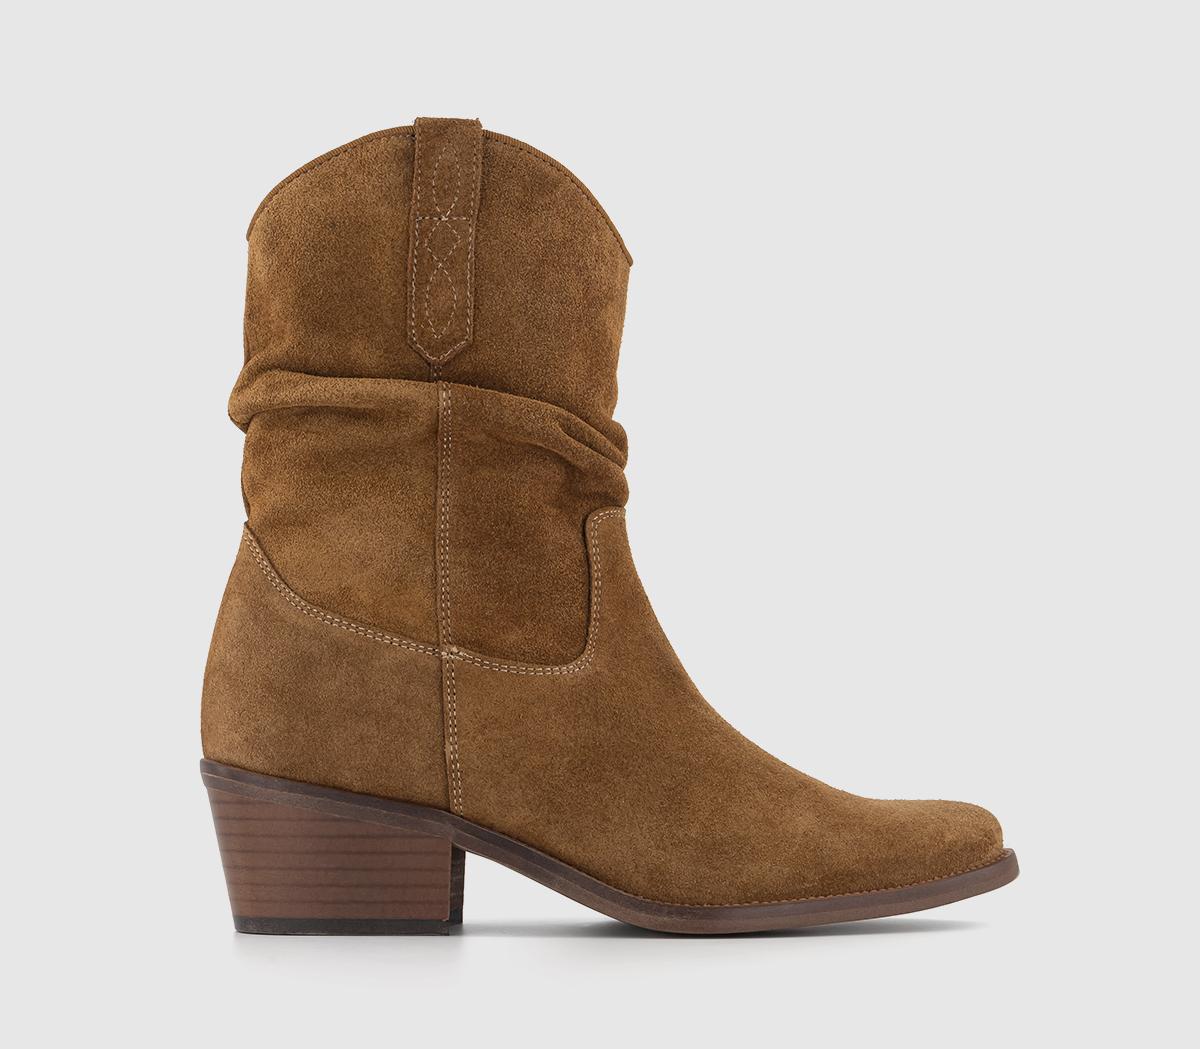 OFFICEAustin Ruched Western BootsTan Suede